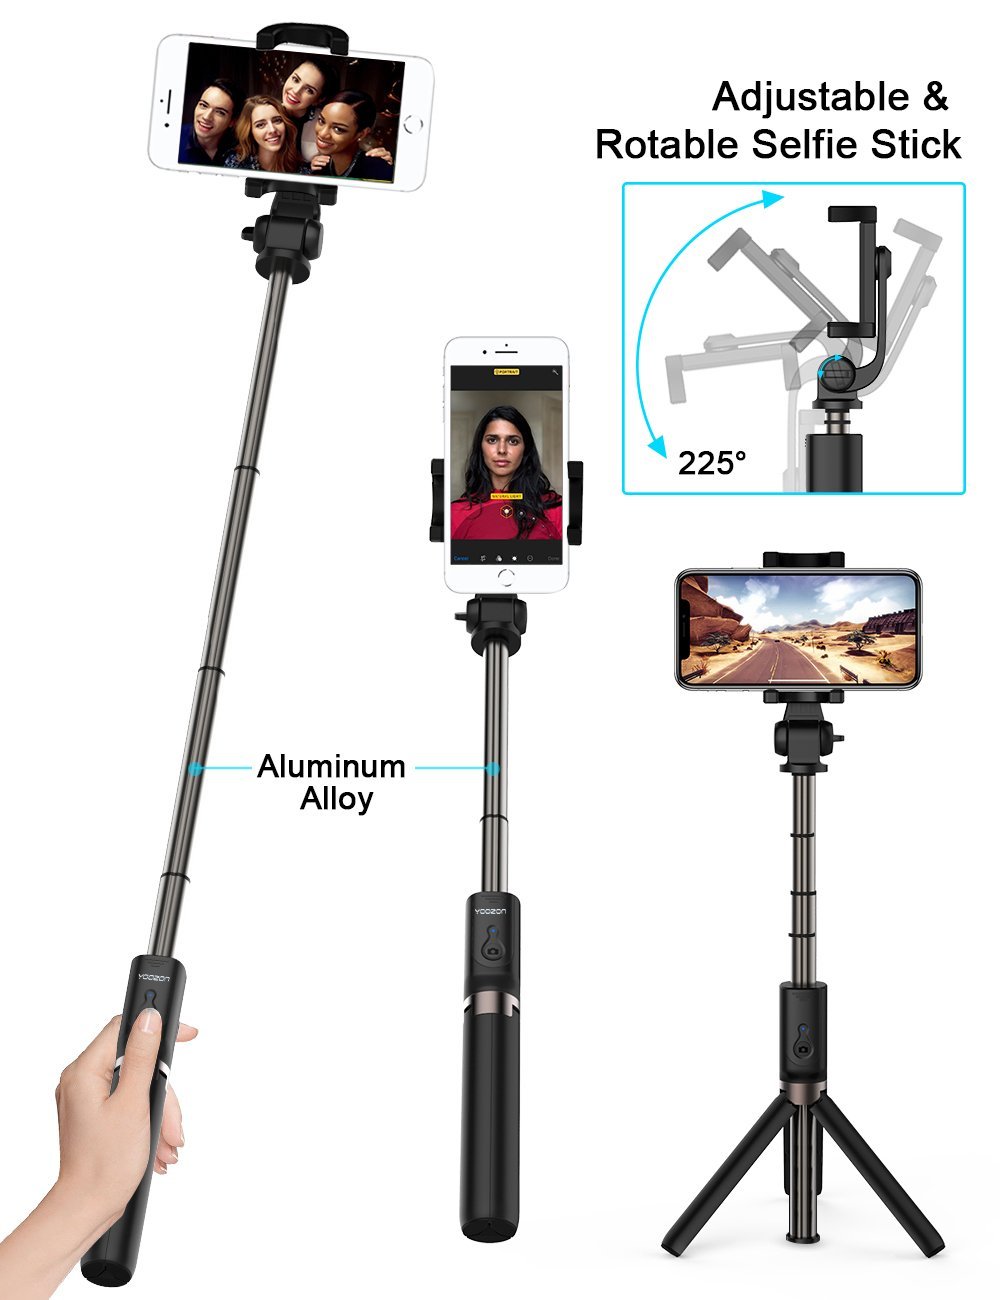 Yoozon Selfie Stick Bluetooth, Extendable Selfie Stick with Wireless Remote and Tripod Stand Selfie Stick for iPhone X /iPhone 8 /8 Plus/iPhone 7/iPhone 7 Plus/Galaxy Note 8/S8 /S8 Plus/Google